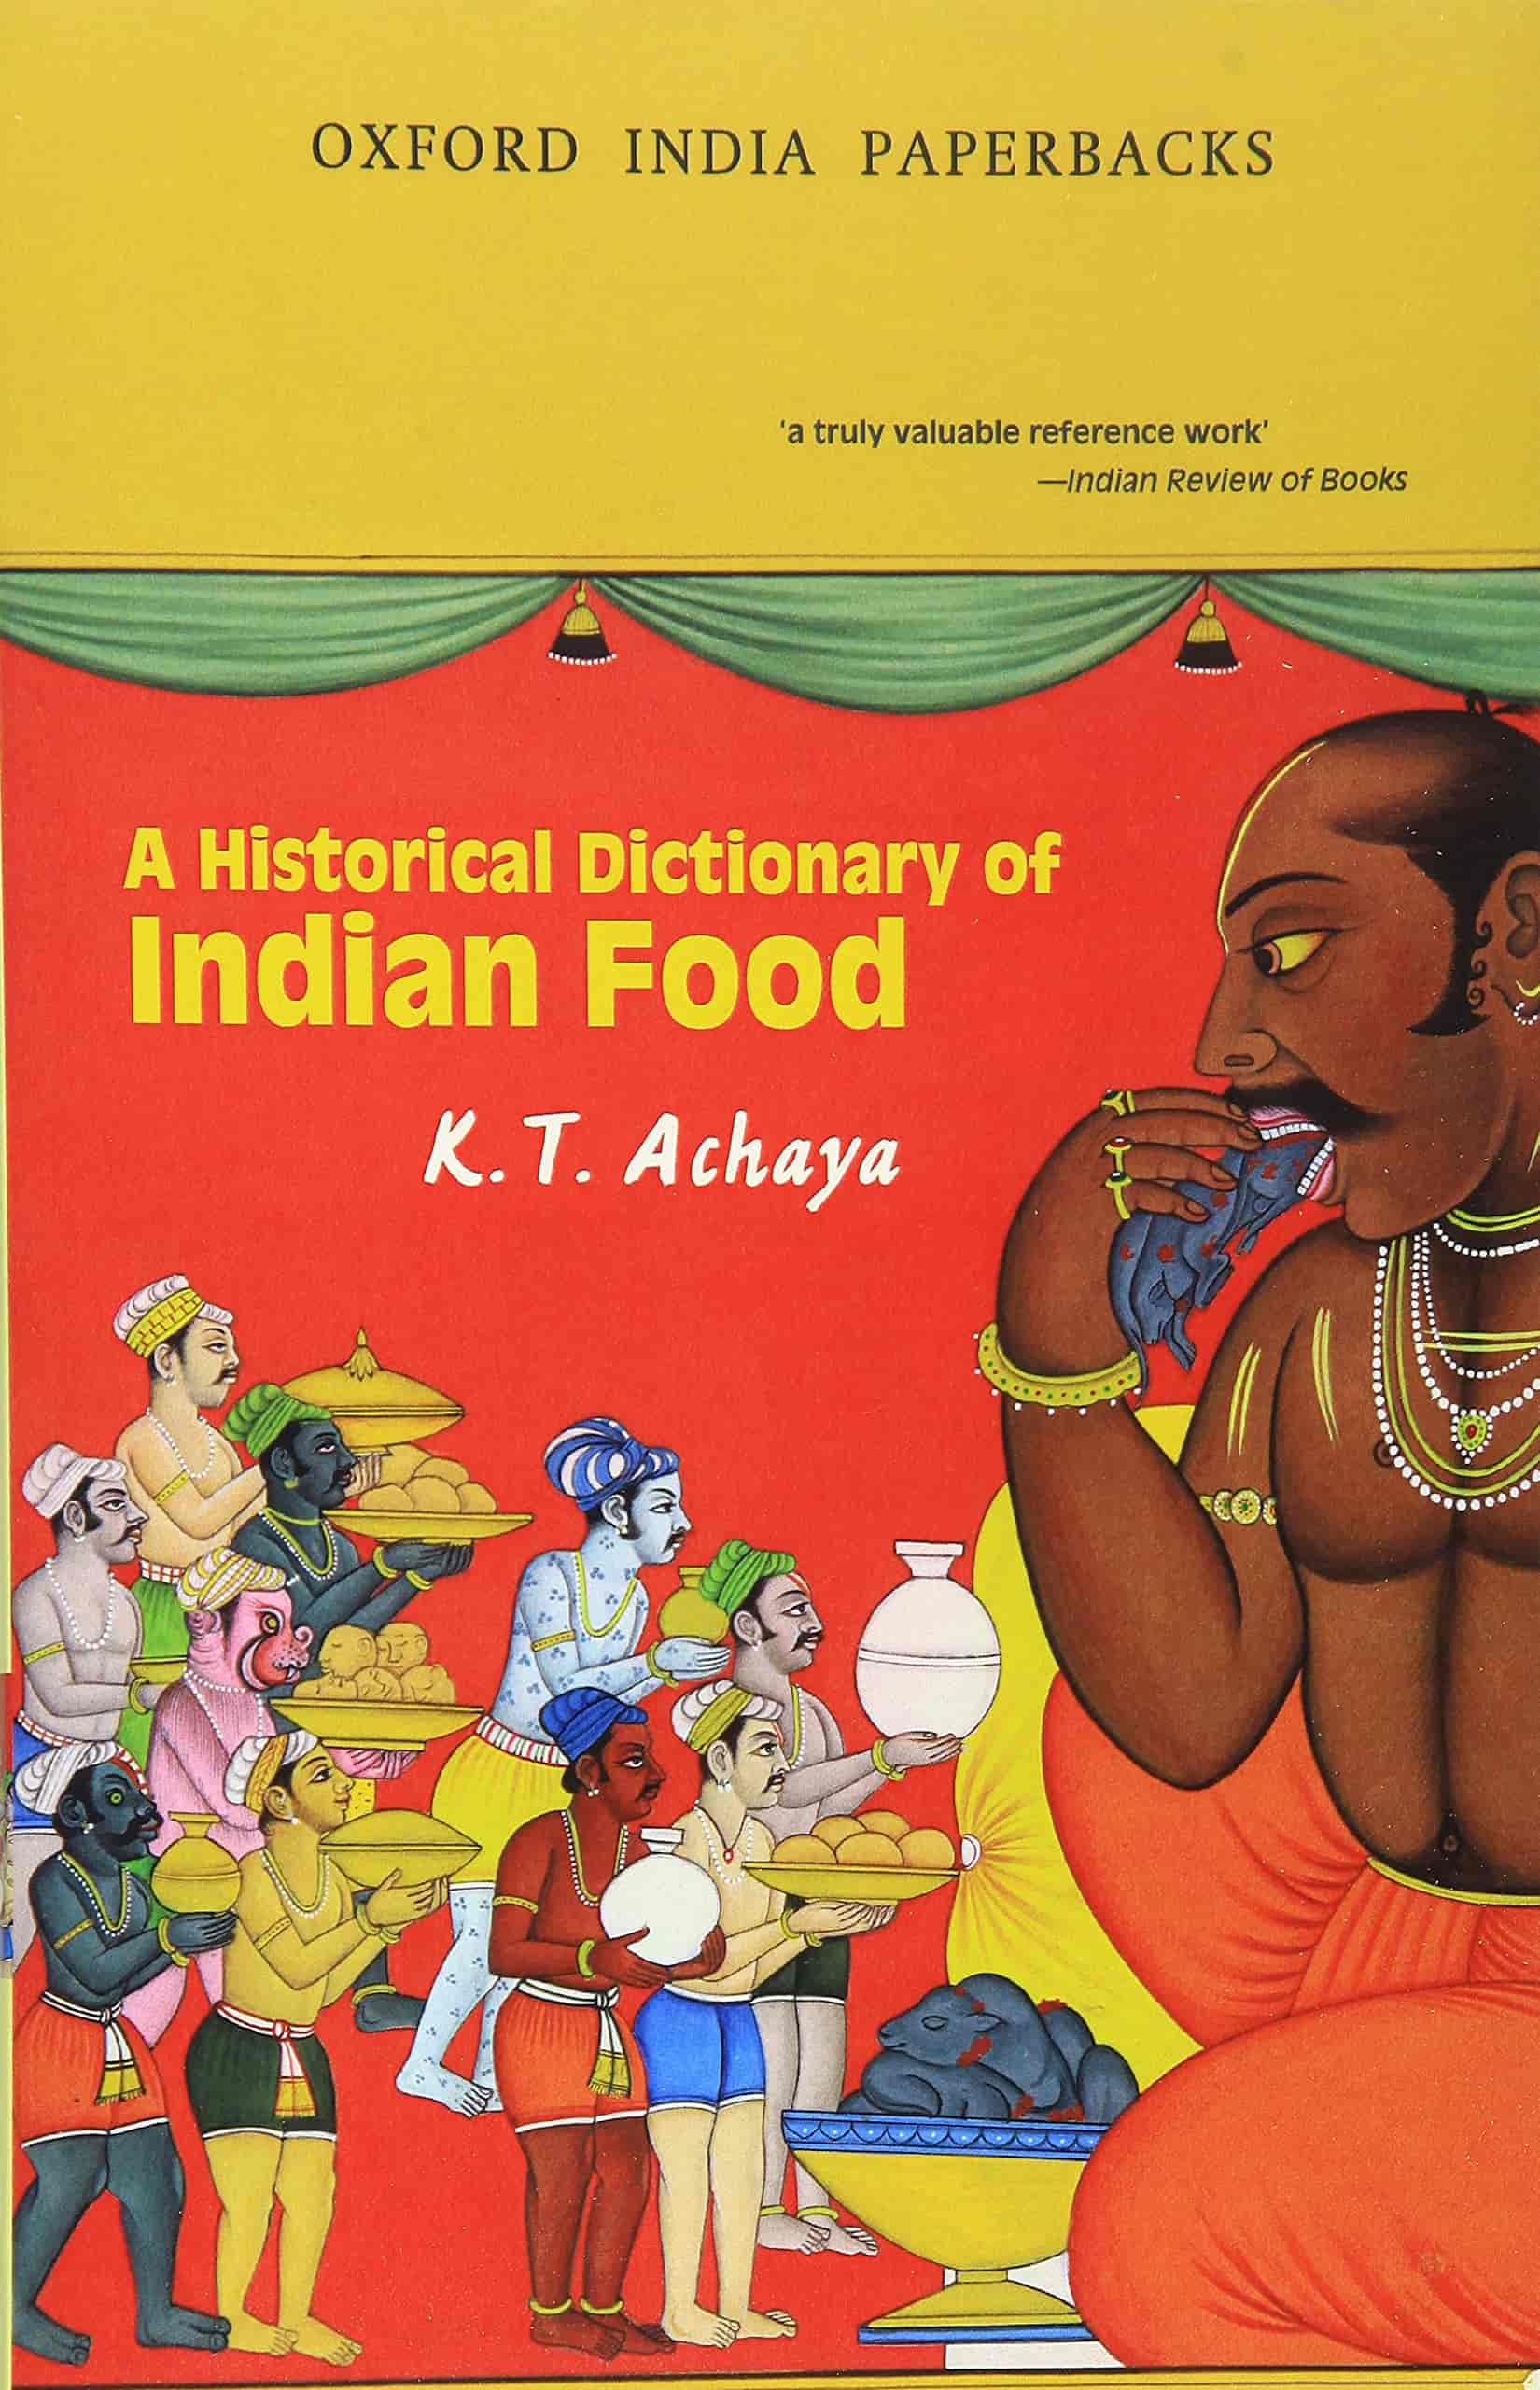 A Historical Dictionary of Indian Food